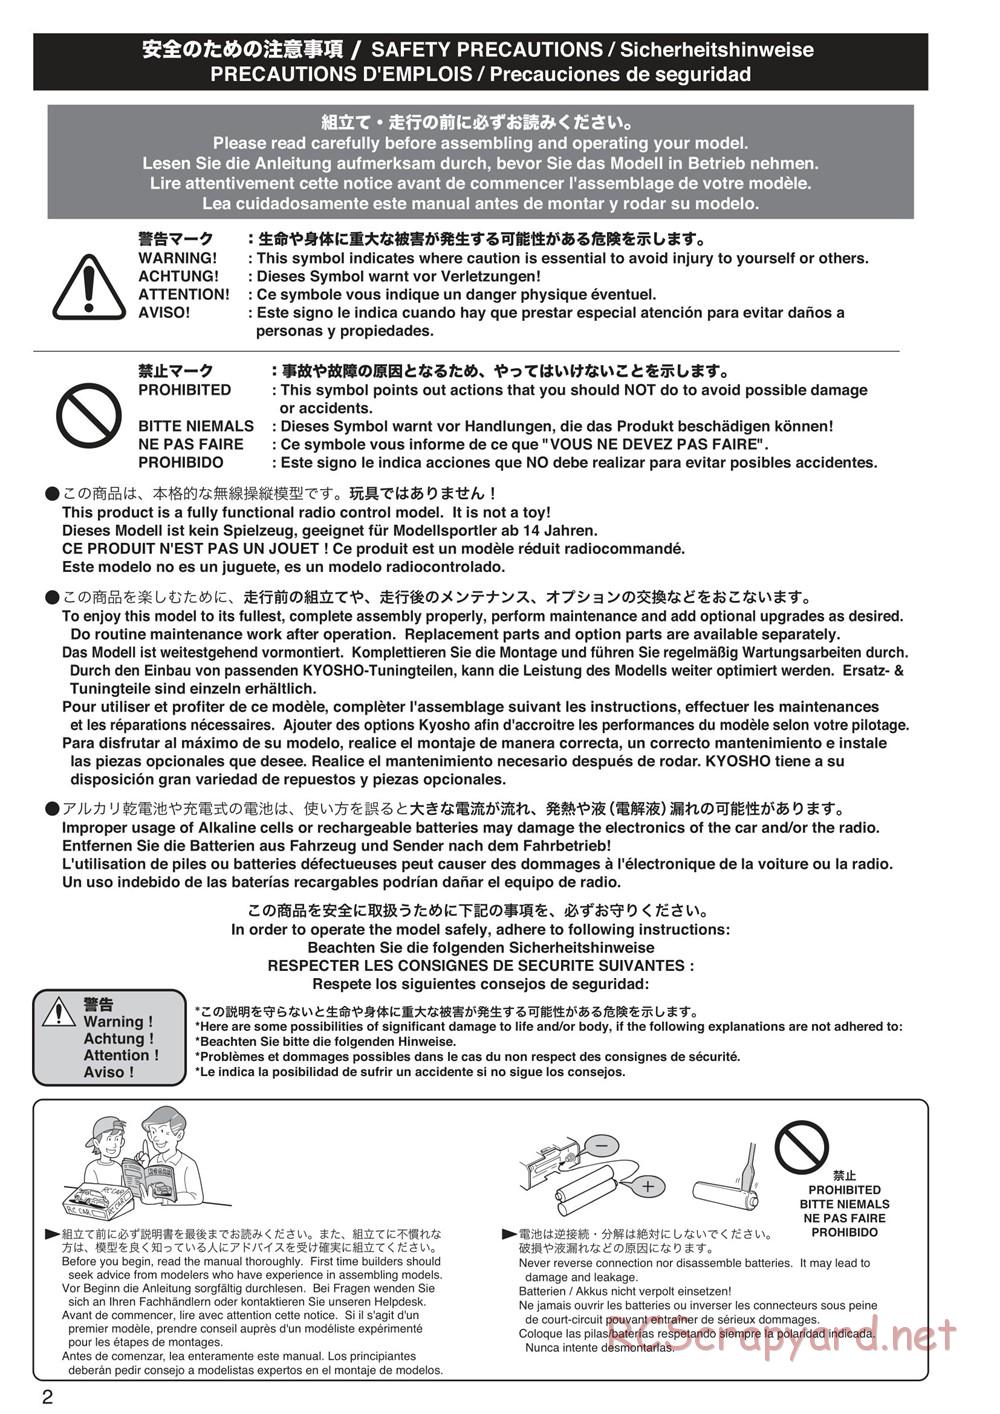 Kyosho - Monster Tracker EP - Manual - Page 2